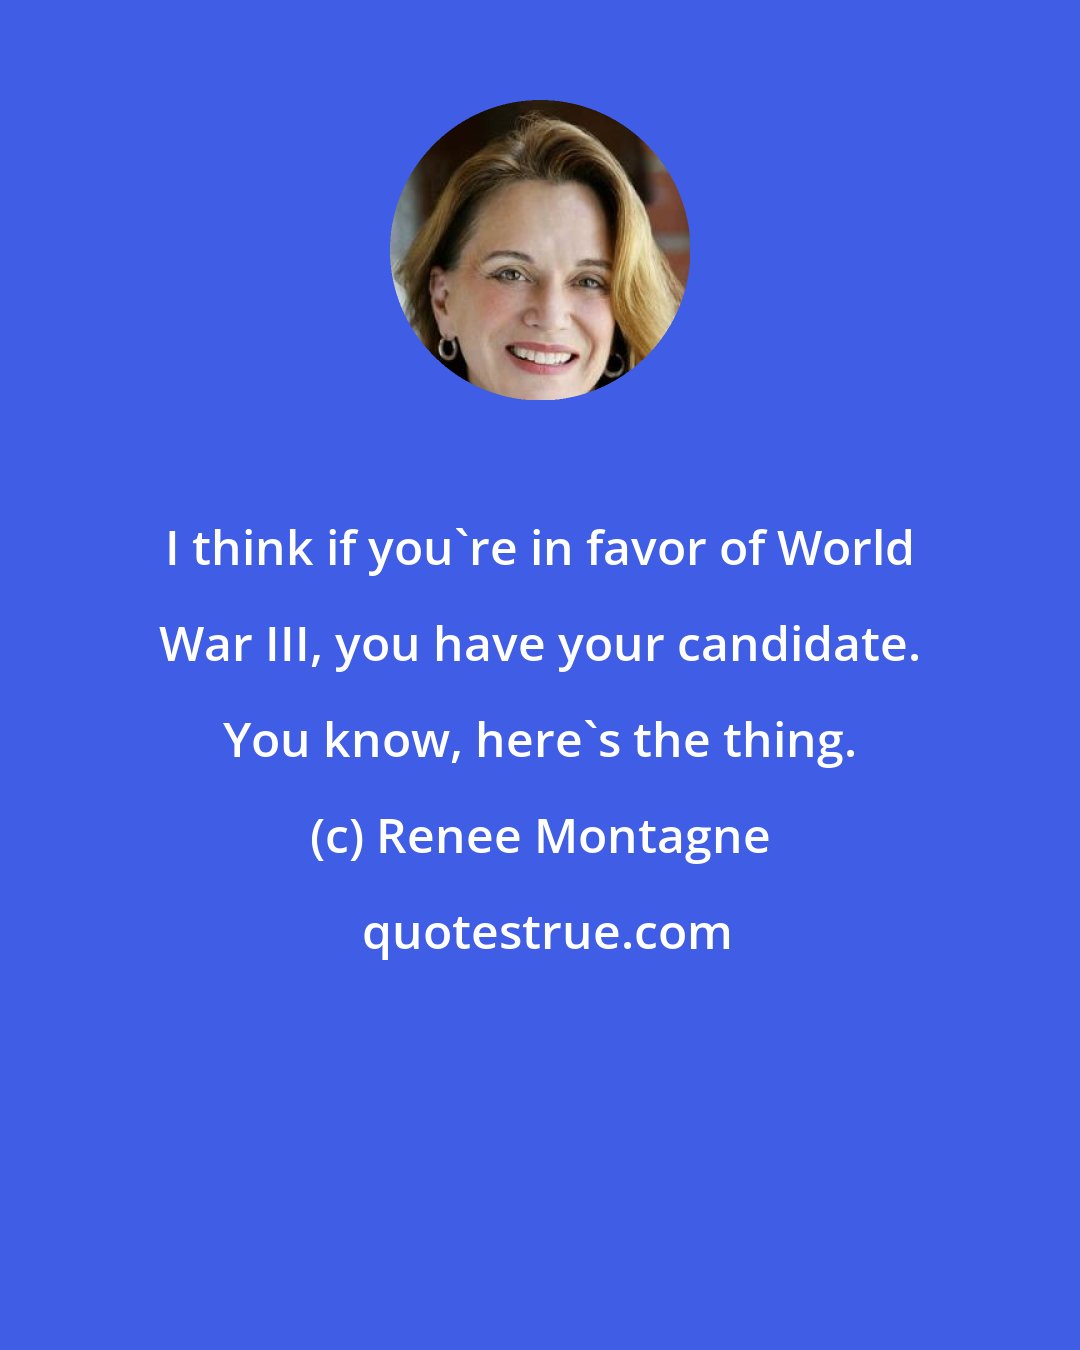 Renee Montagne: I think if you're in favor of World War III, you have your candidate. You know, here's the thing.